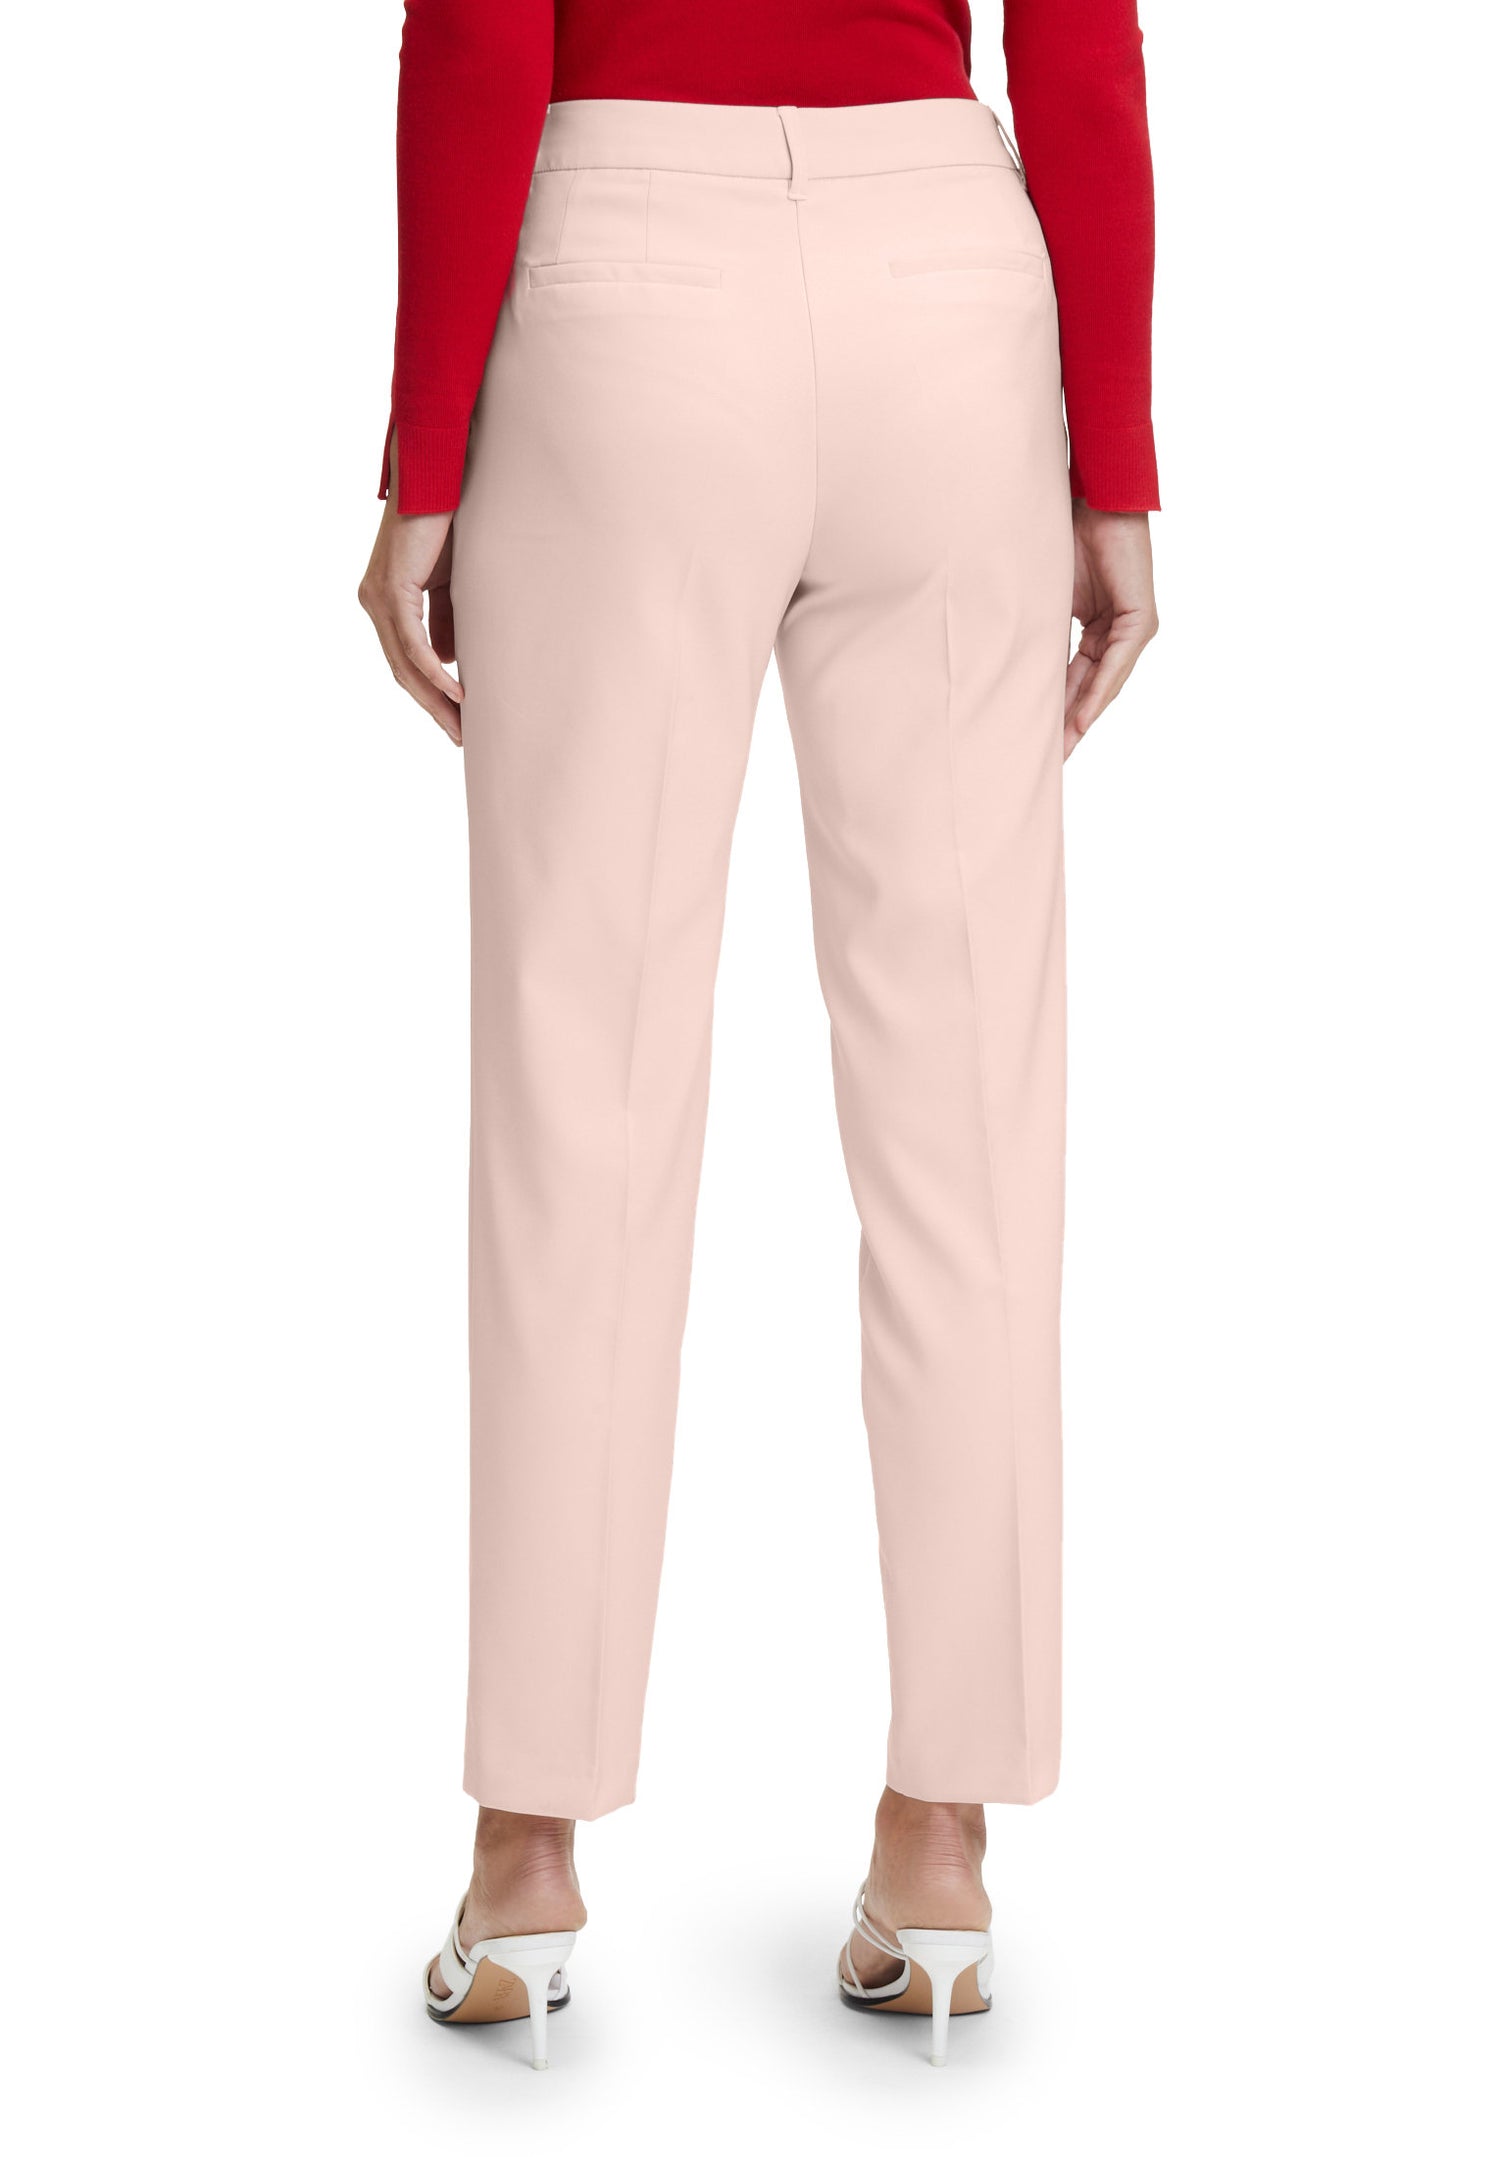 Business Trousers
With Crease_6002-1080_6055_04